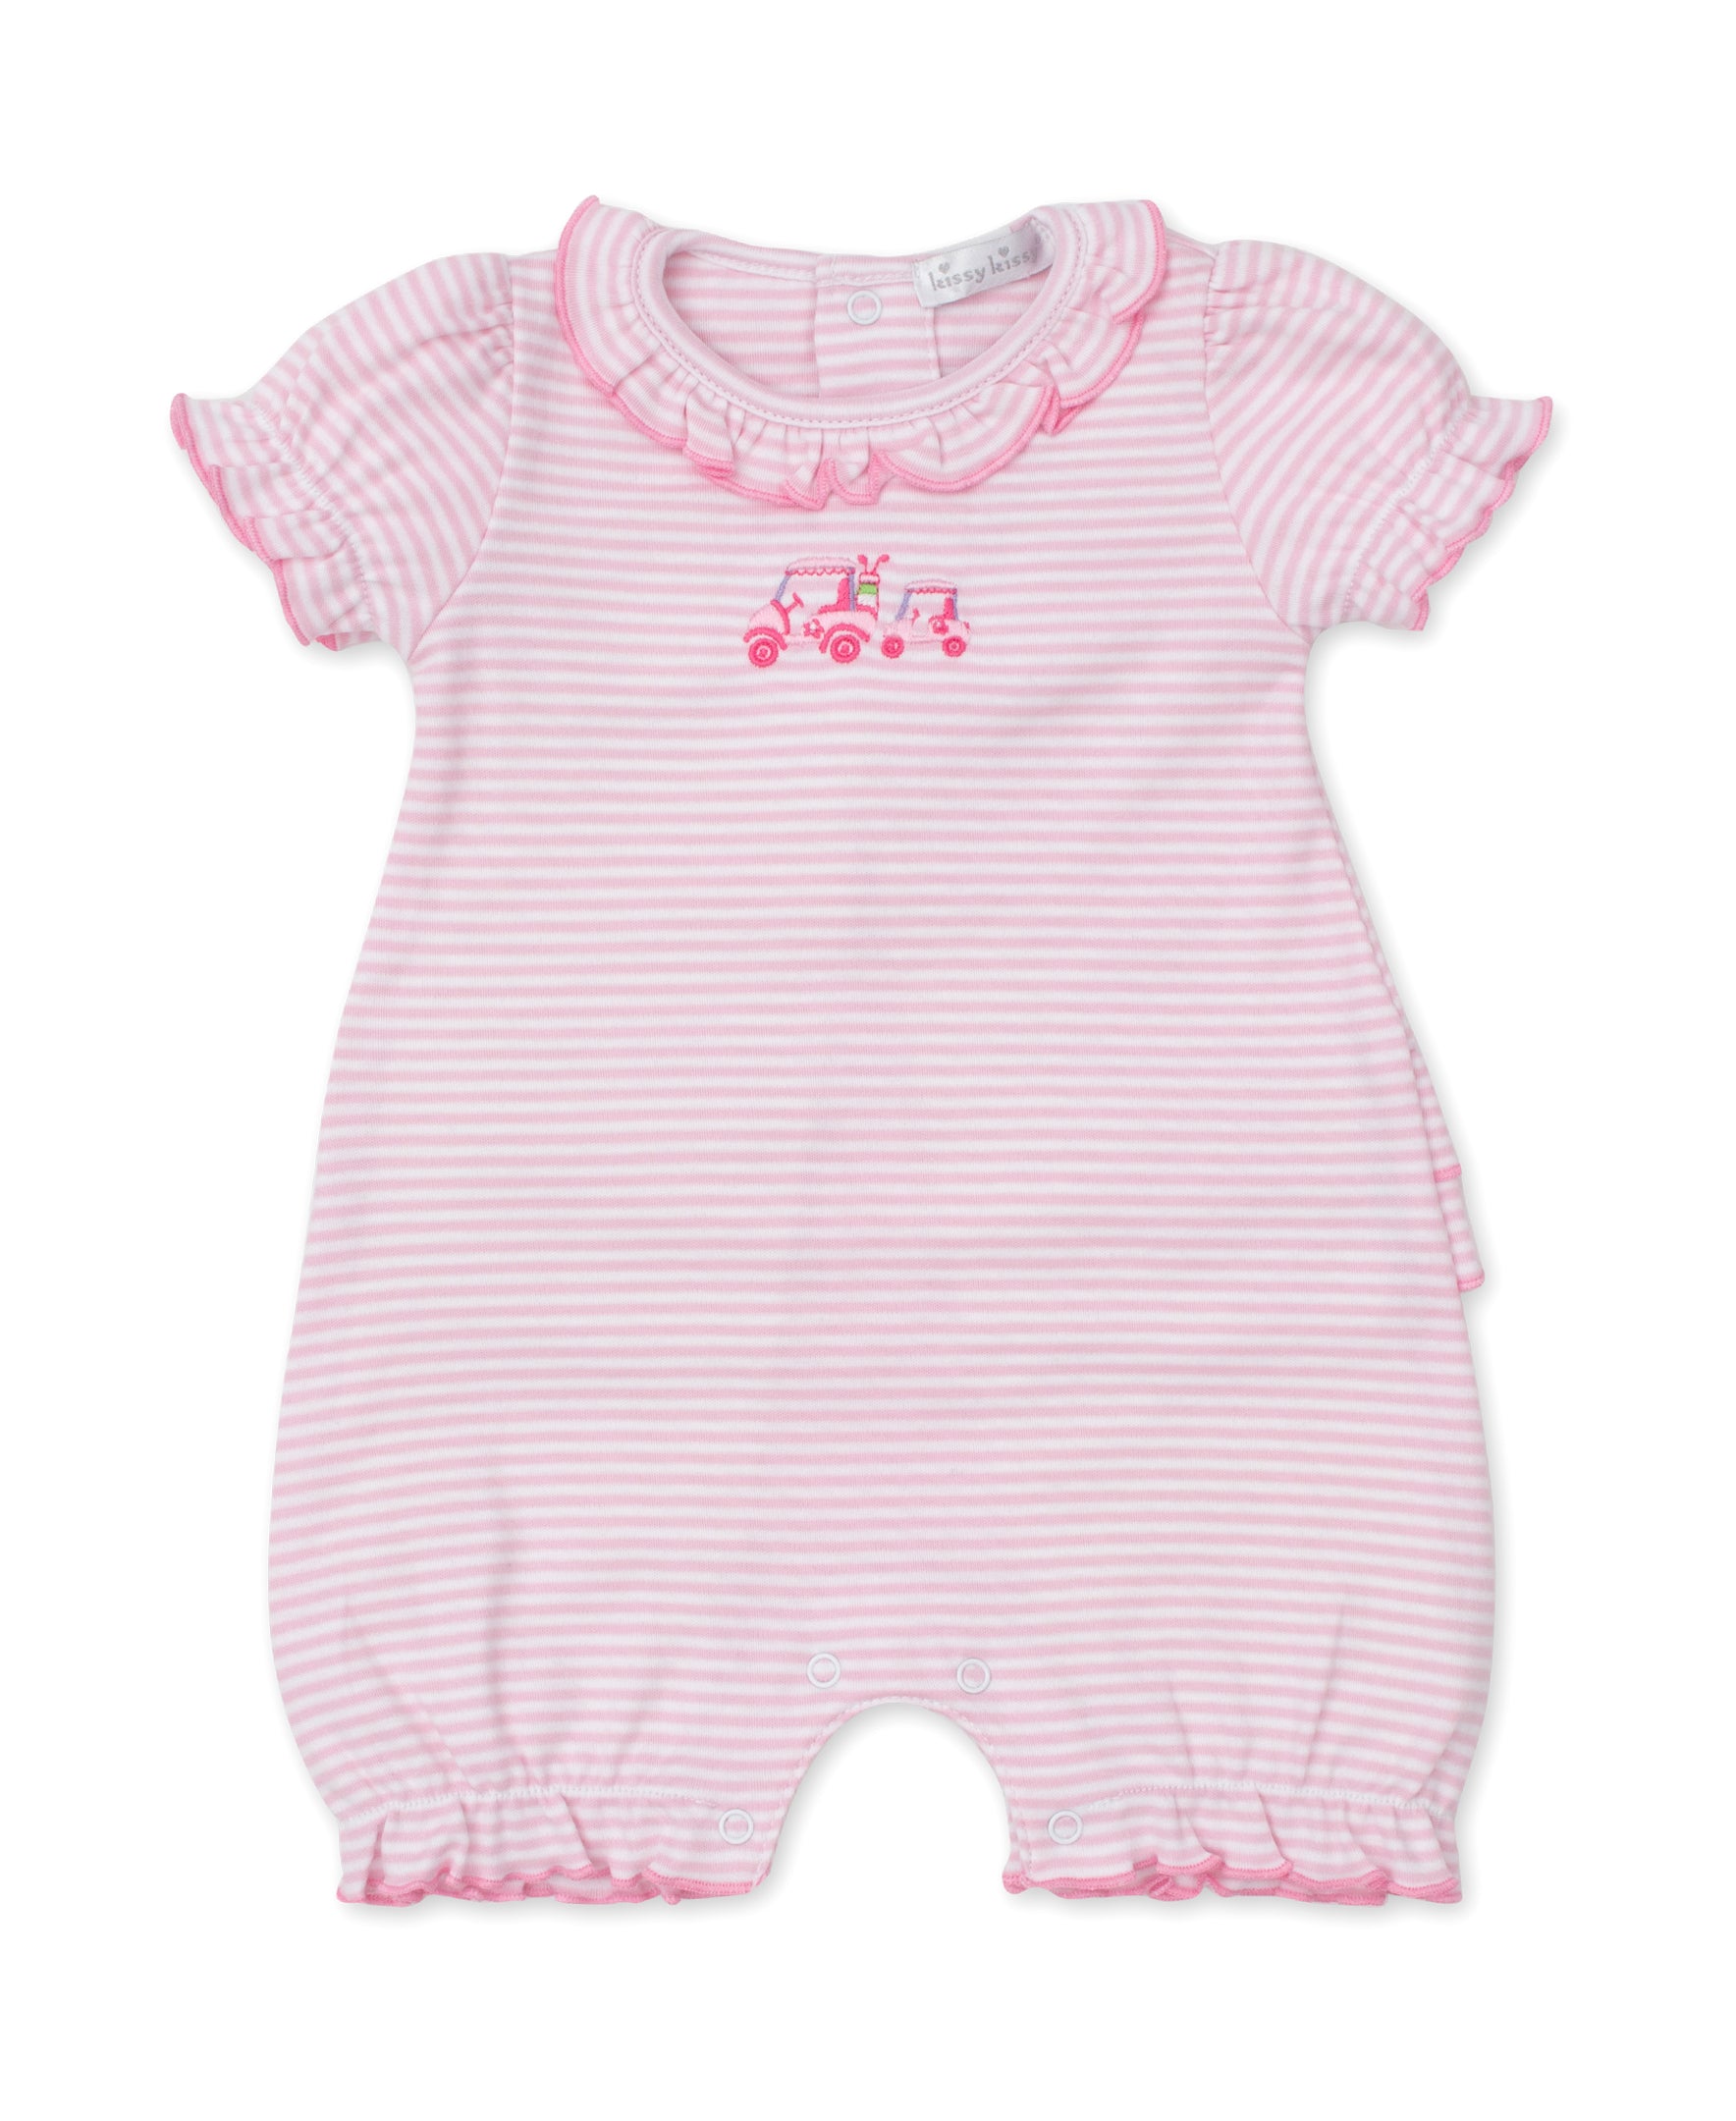 Hole In One Pink Stripe Short Playsuit - Kissy Kissy